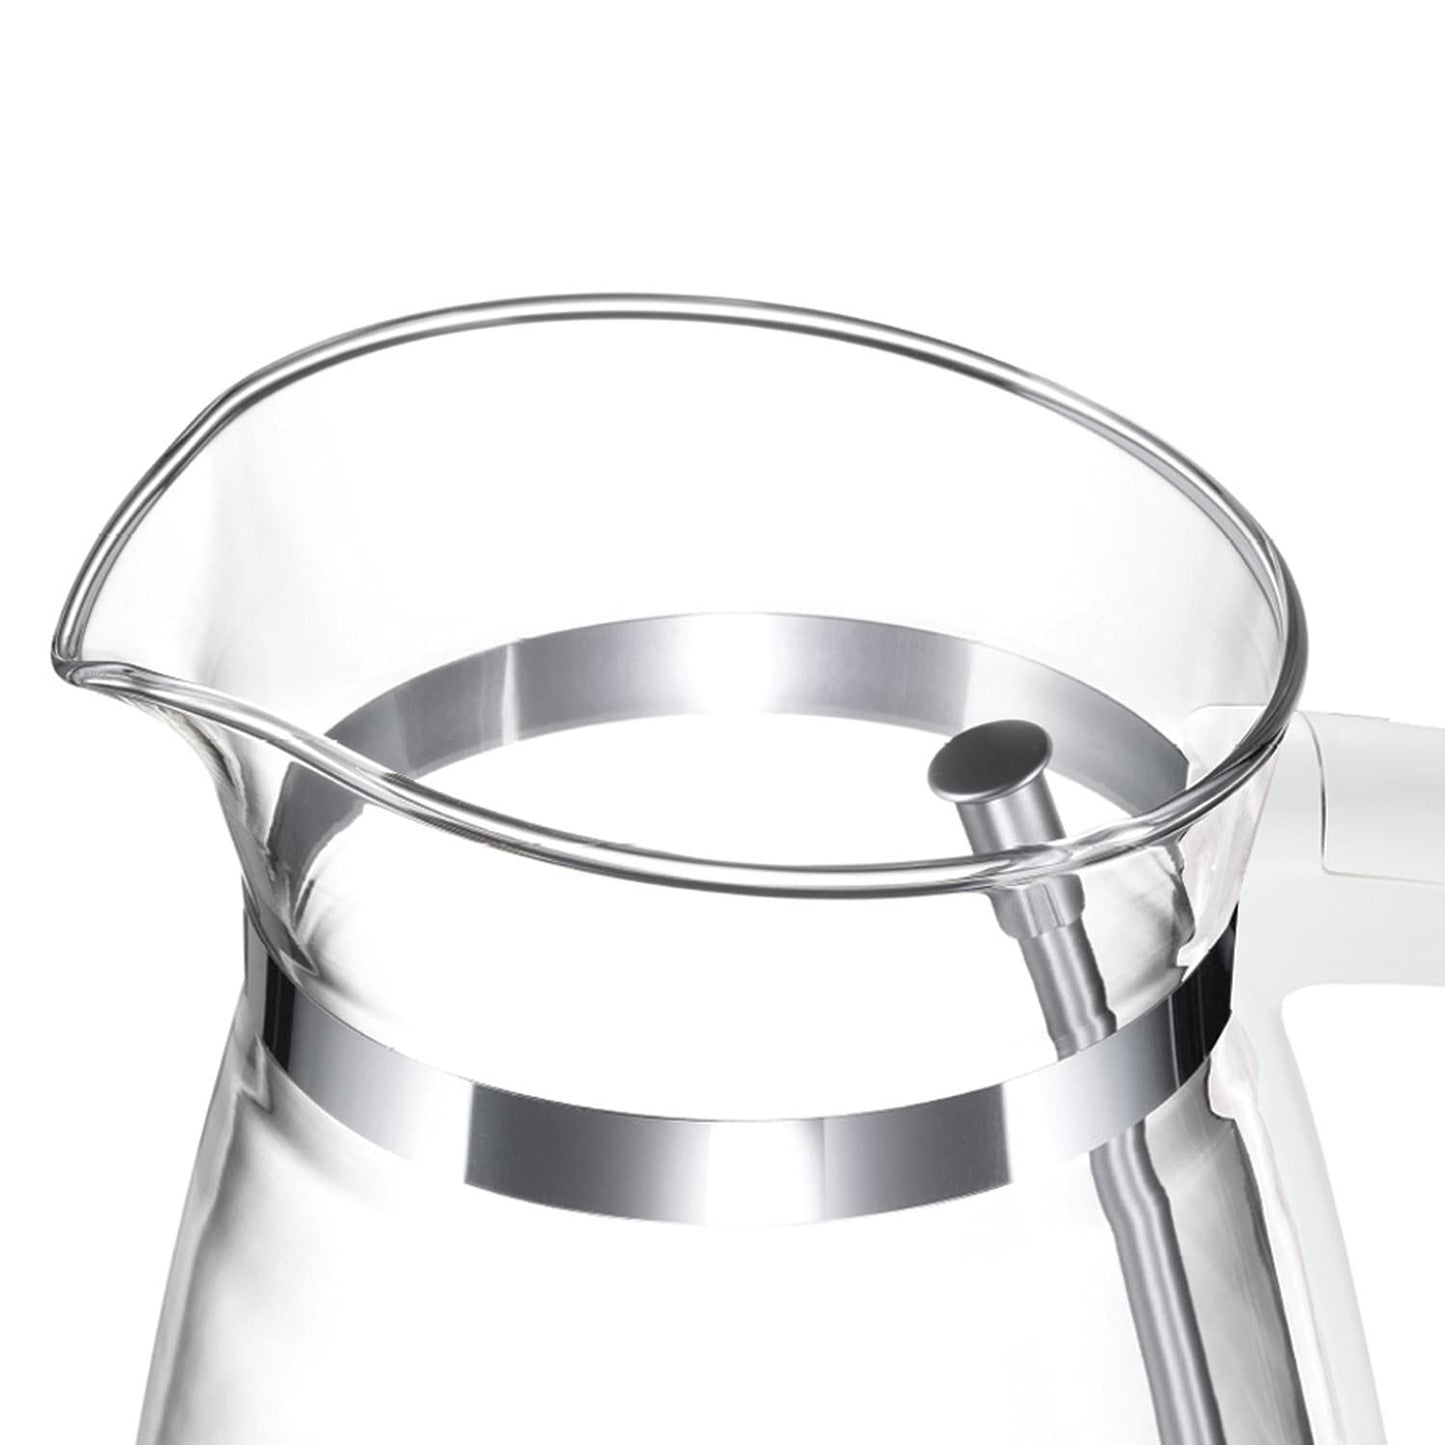 Russell Hobbs Classic White Glass Kettle